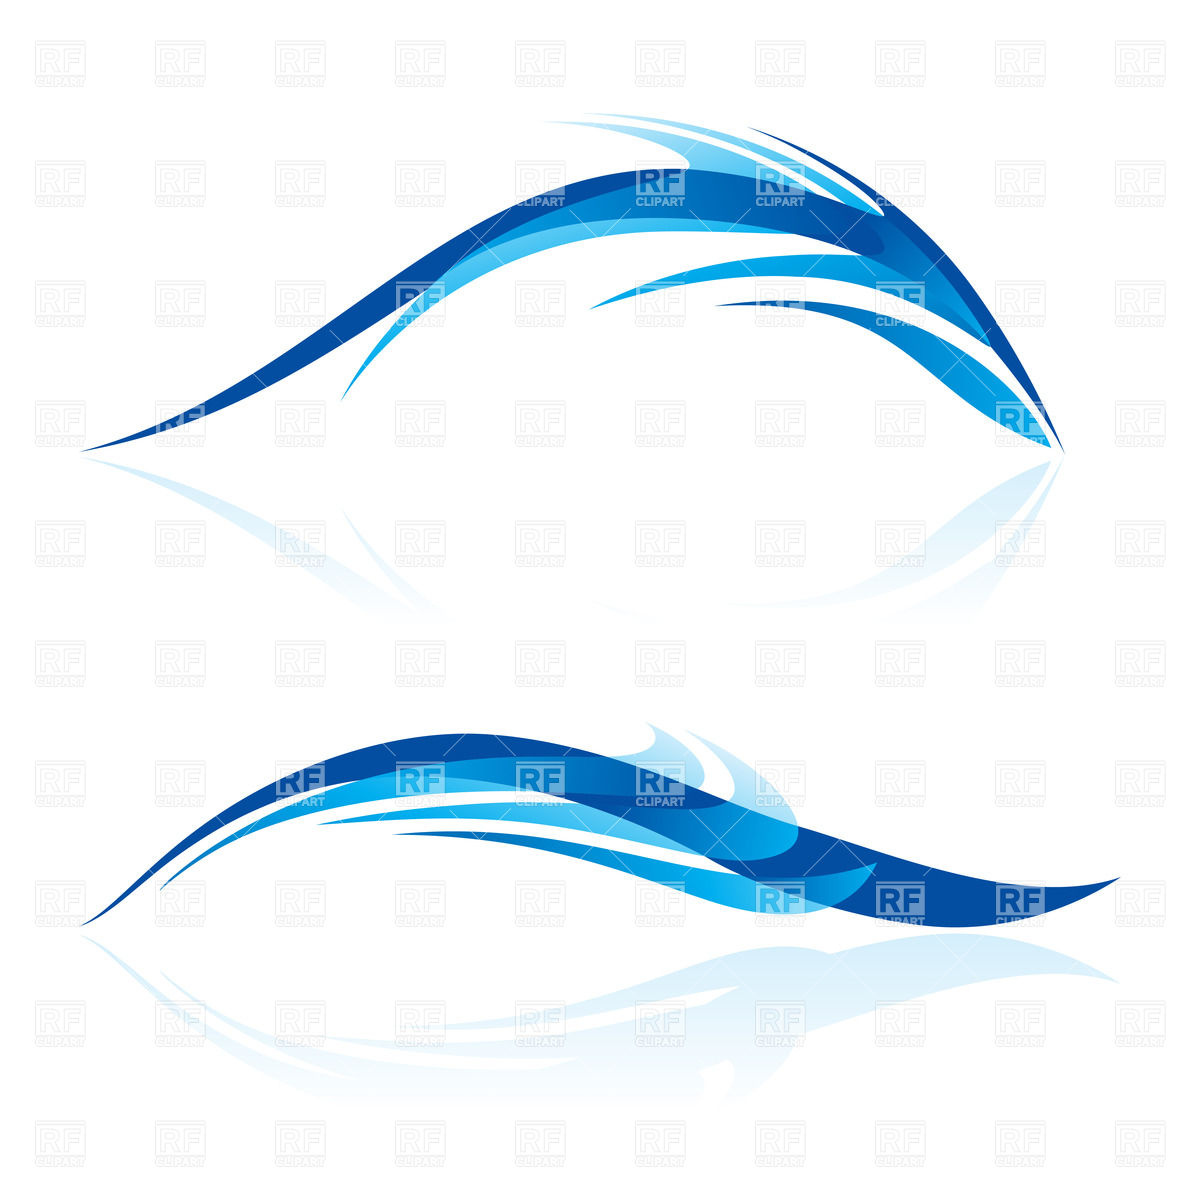 Blue Fish Like Design Elements   Curved Lines 20882 Download Royalty